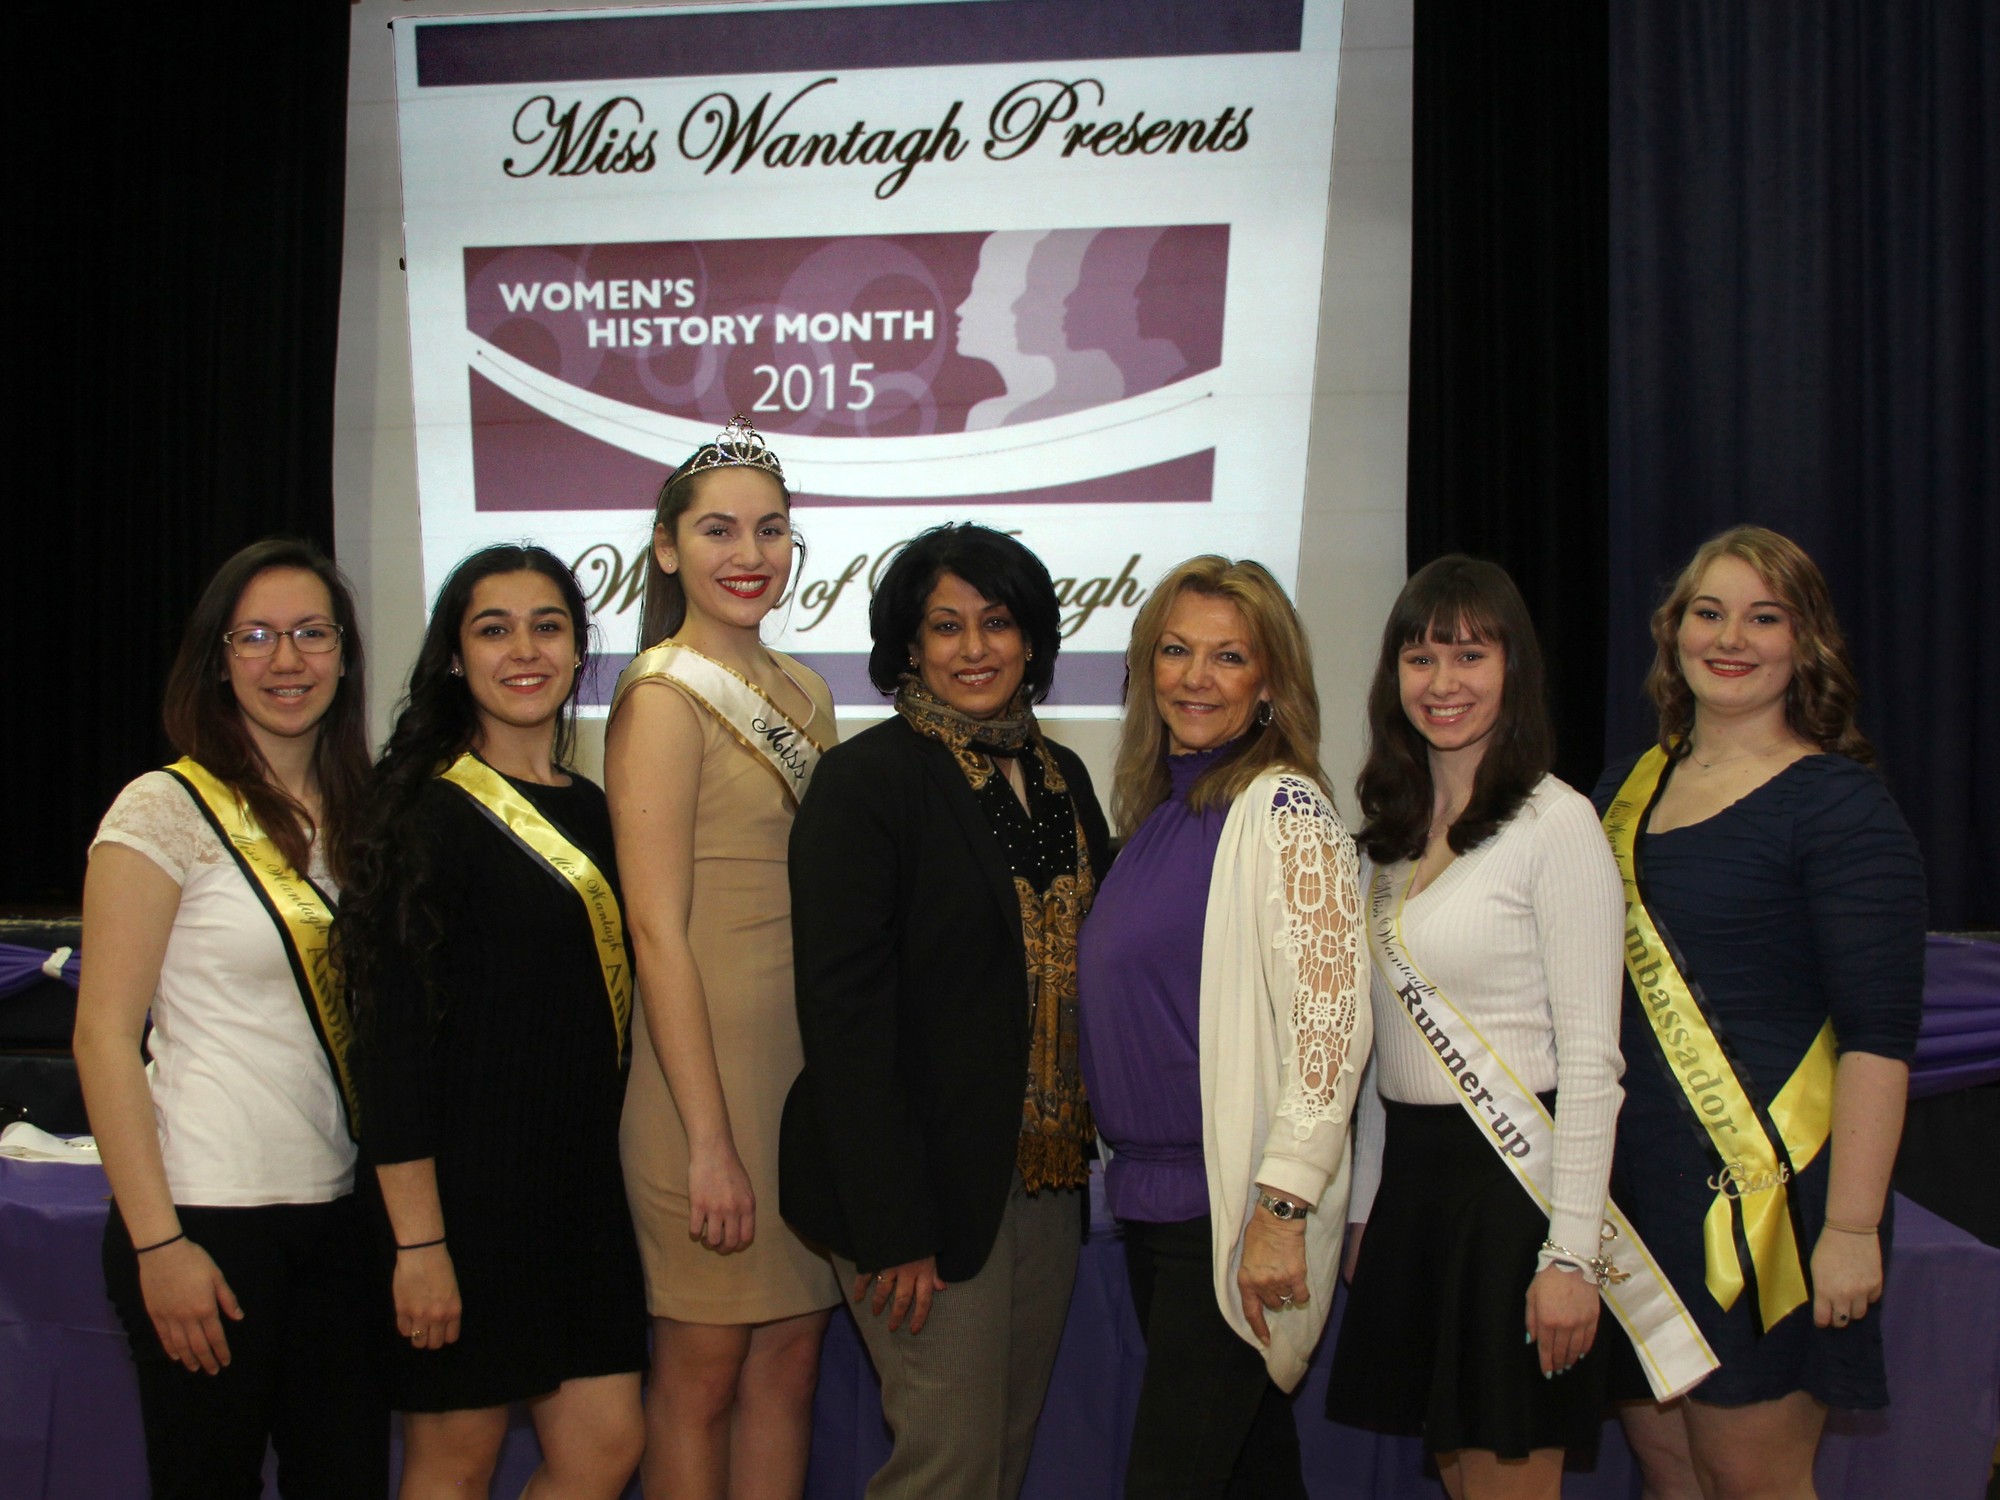 The Miss Wantagh Court hosted its first Women of Wantagh program on March 30 at Wantagh Elementary School, honoring local women of distinction. From left are Nyatasha Jackowicz and Amanda Caso, ambassadors; Miss Wantagh Kayla Knight; Hempstead Town Clerk Nasrin Ahmad, Pageant Coordinator Ella Stevens; Christine Parola, second runner-up and Tylar Banedetto, ambassador.